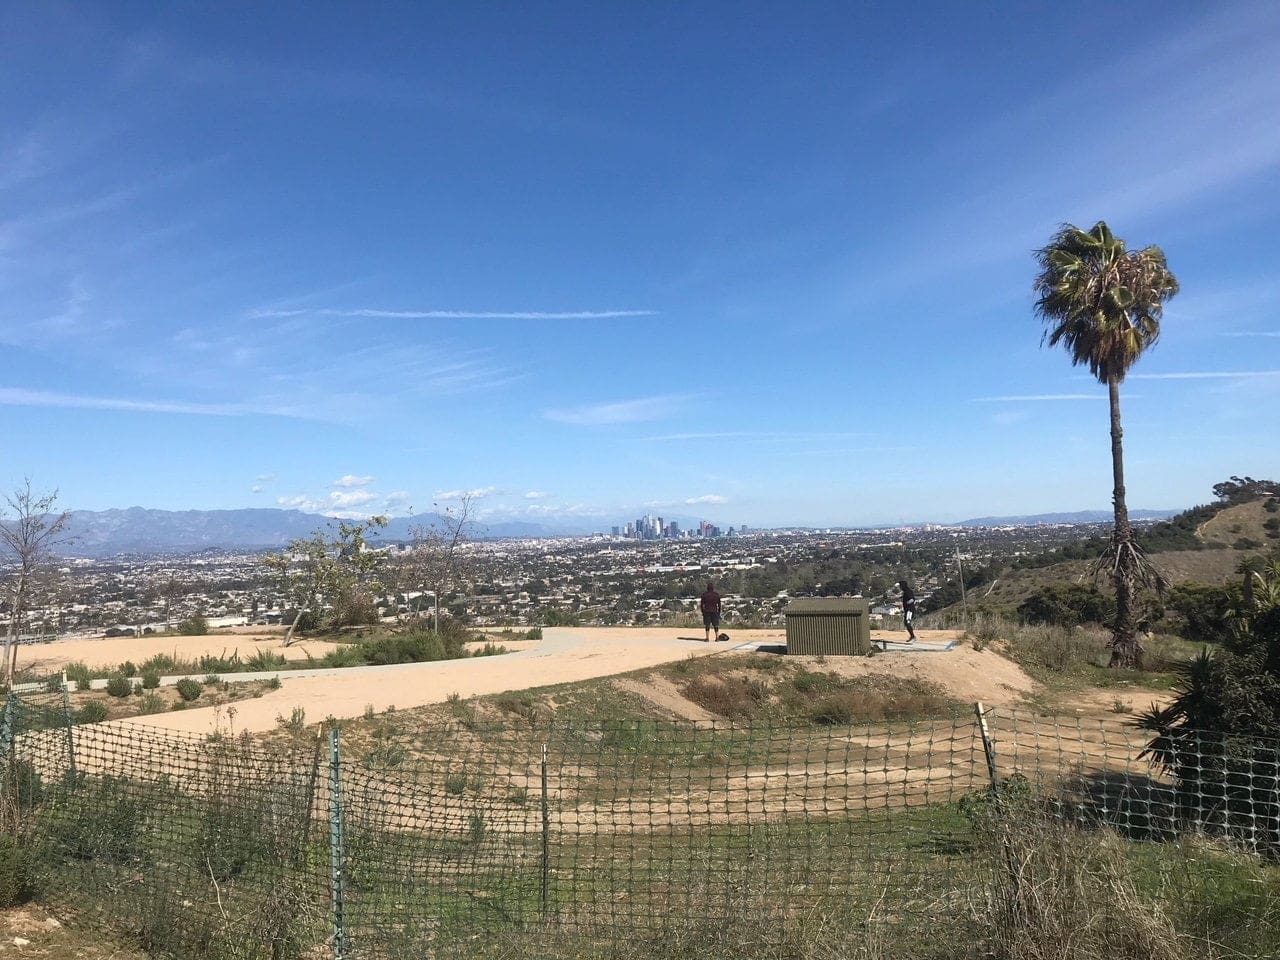 Culver city stairs trail